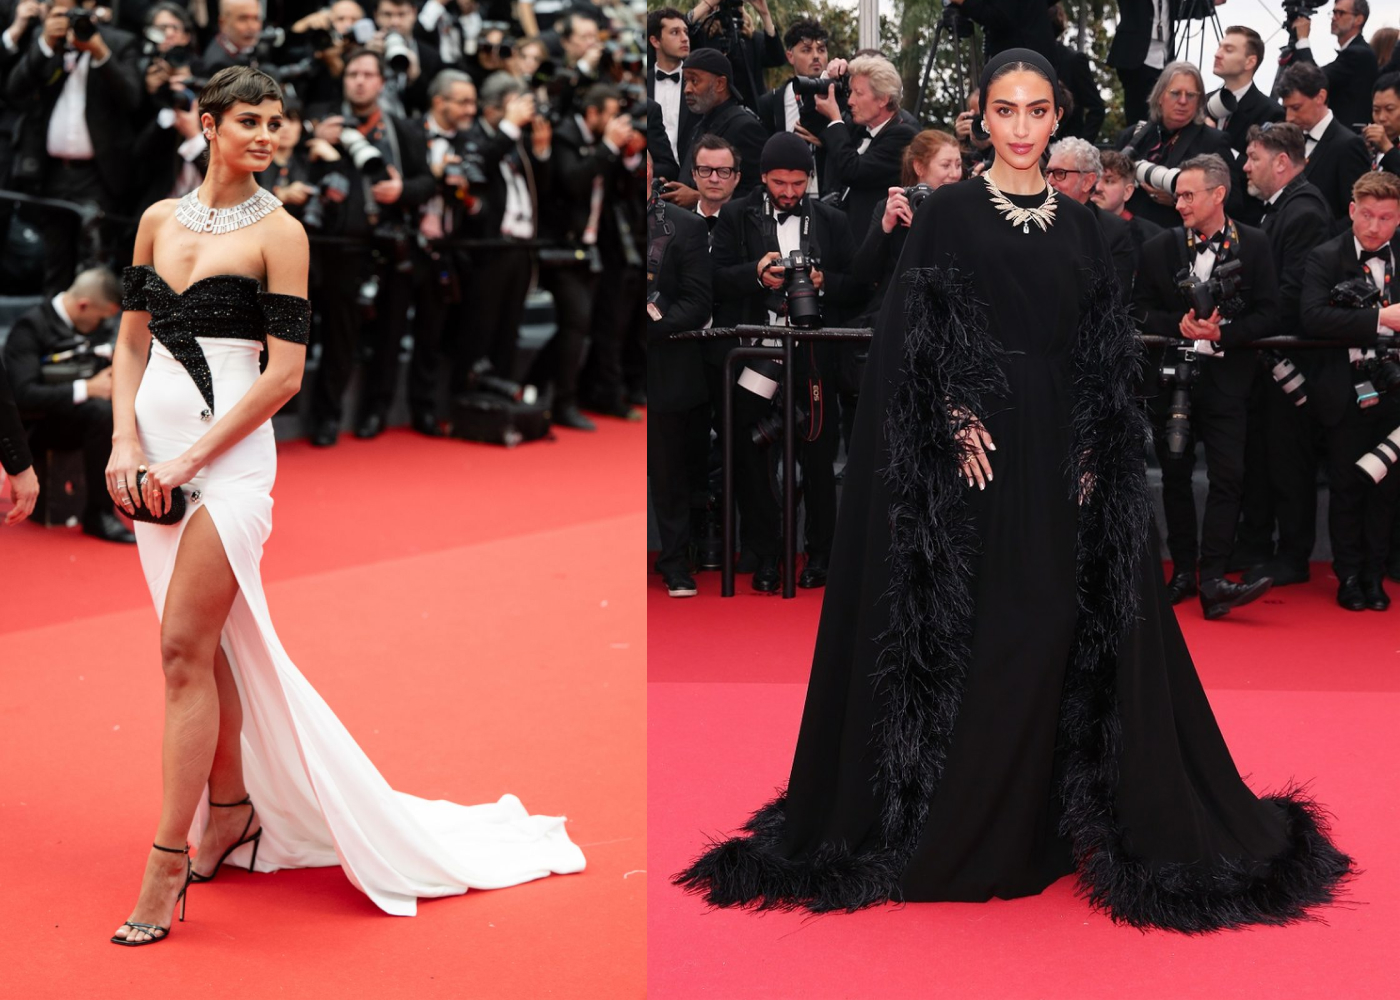 Supermodel Taylor Hill (left) wore the Messika Imperial Move necklace from the Beyond The Light High Jewellery collection, while Saudi entrepreneur Yara Alnamlah wowed in the Chaumet Blé (Wheat) necklace from the Le Jardin de Chaumet High Jewellery collection at the Cannes Film Festival 2024